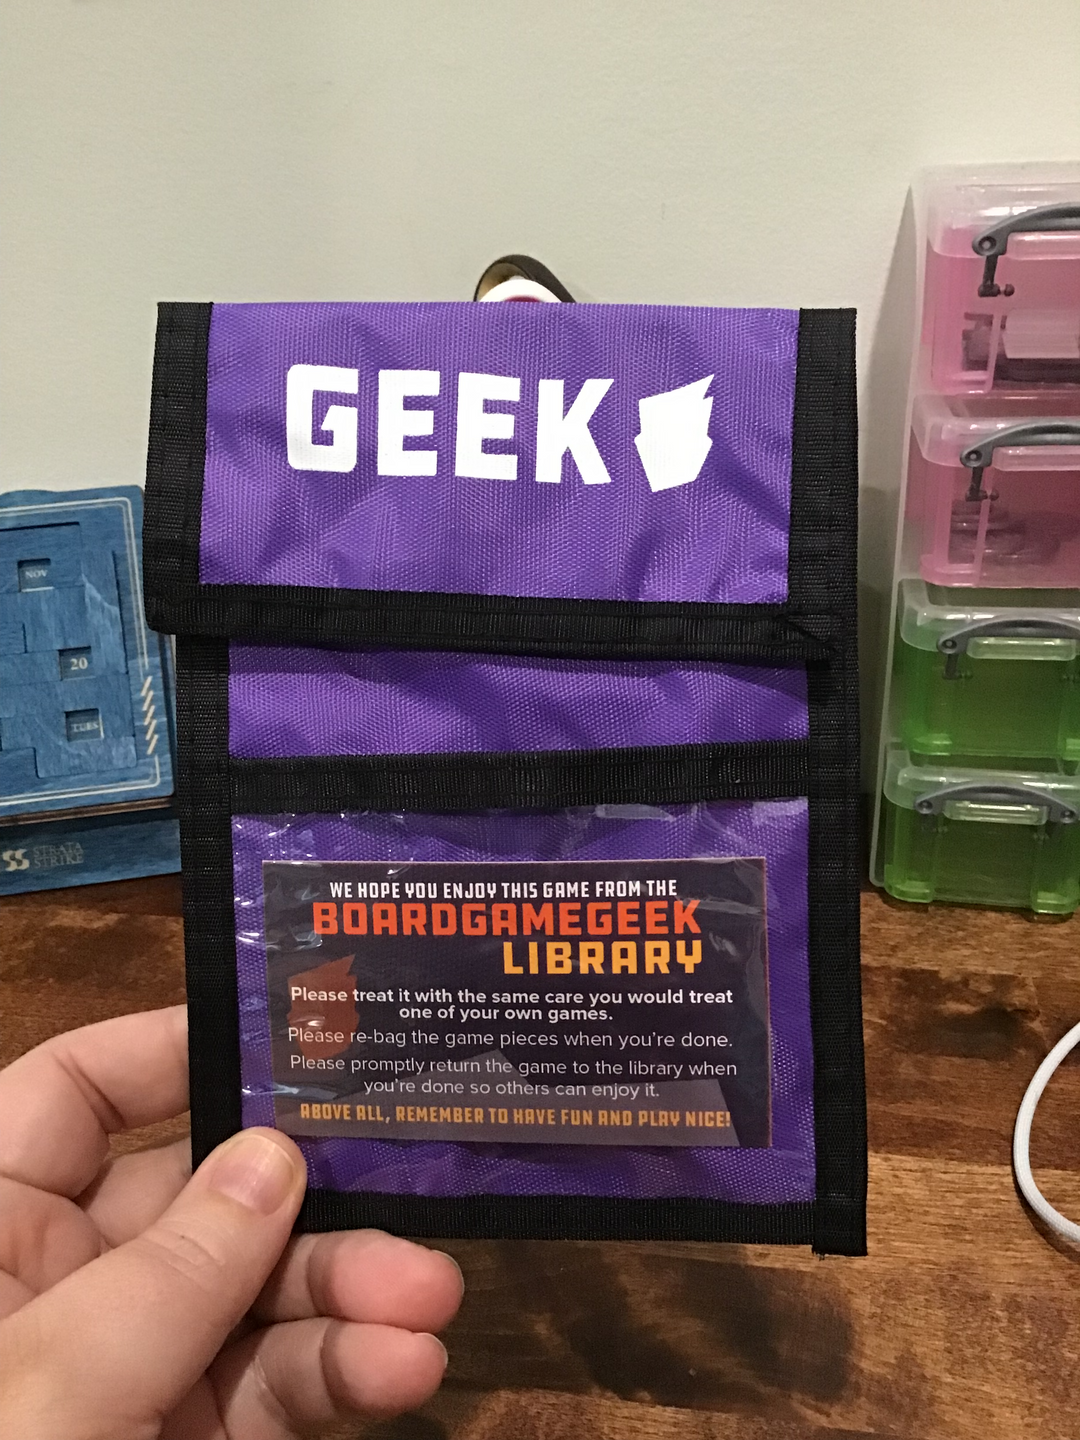 A photo of a purple neck wallet with black trim. The top flap is closed down and printed with a logo and the word "GEEK" at the top. A business card for the "BoardGameGeek Library" sits in the middle of a plastic window pocket at the bottom.